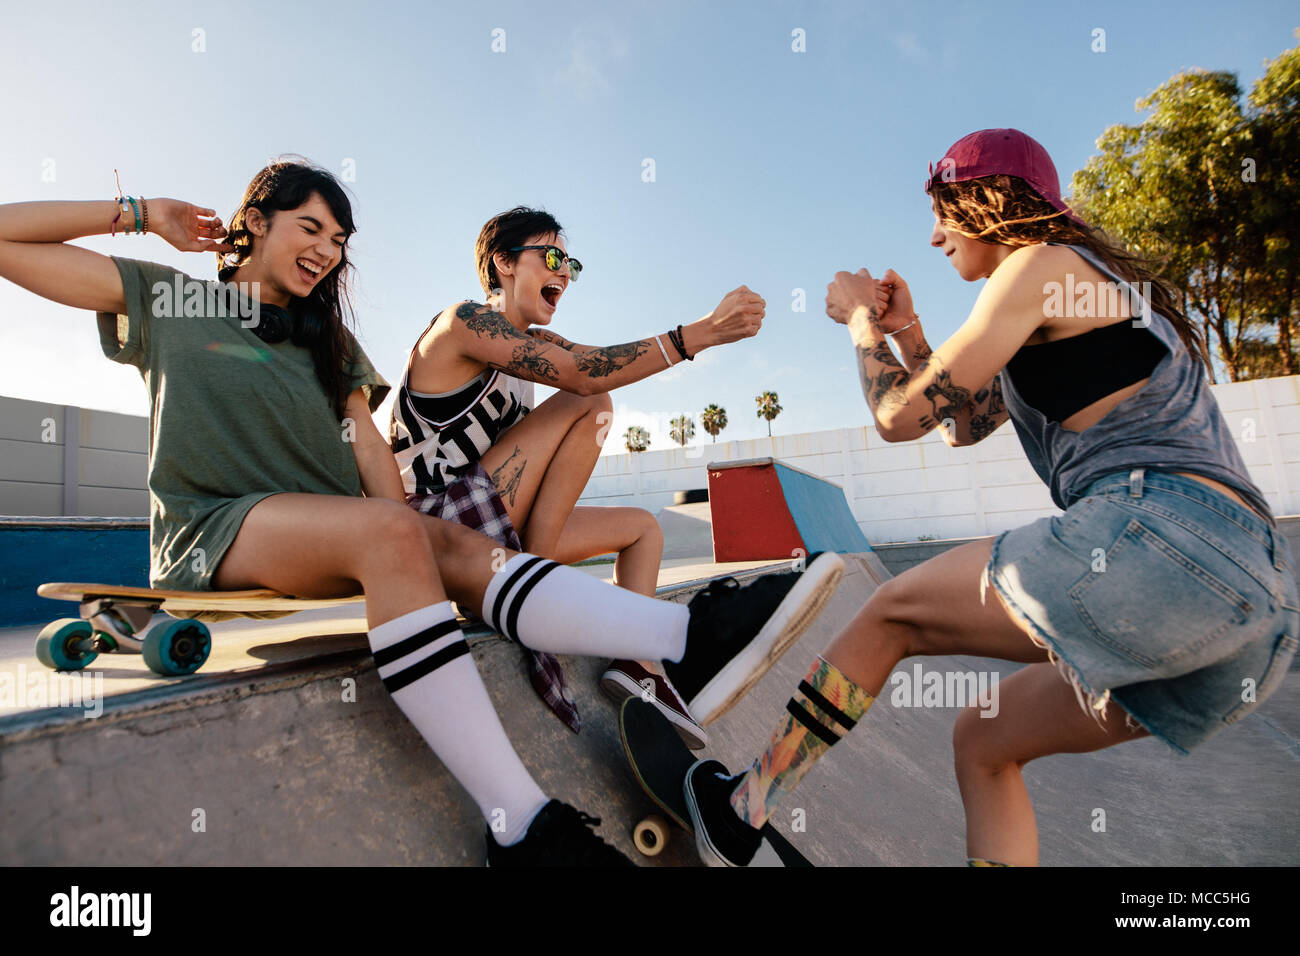 Three young women having a great time at skate park. Young female skateboarding with friends sitting on ramp. Stock Photo